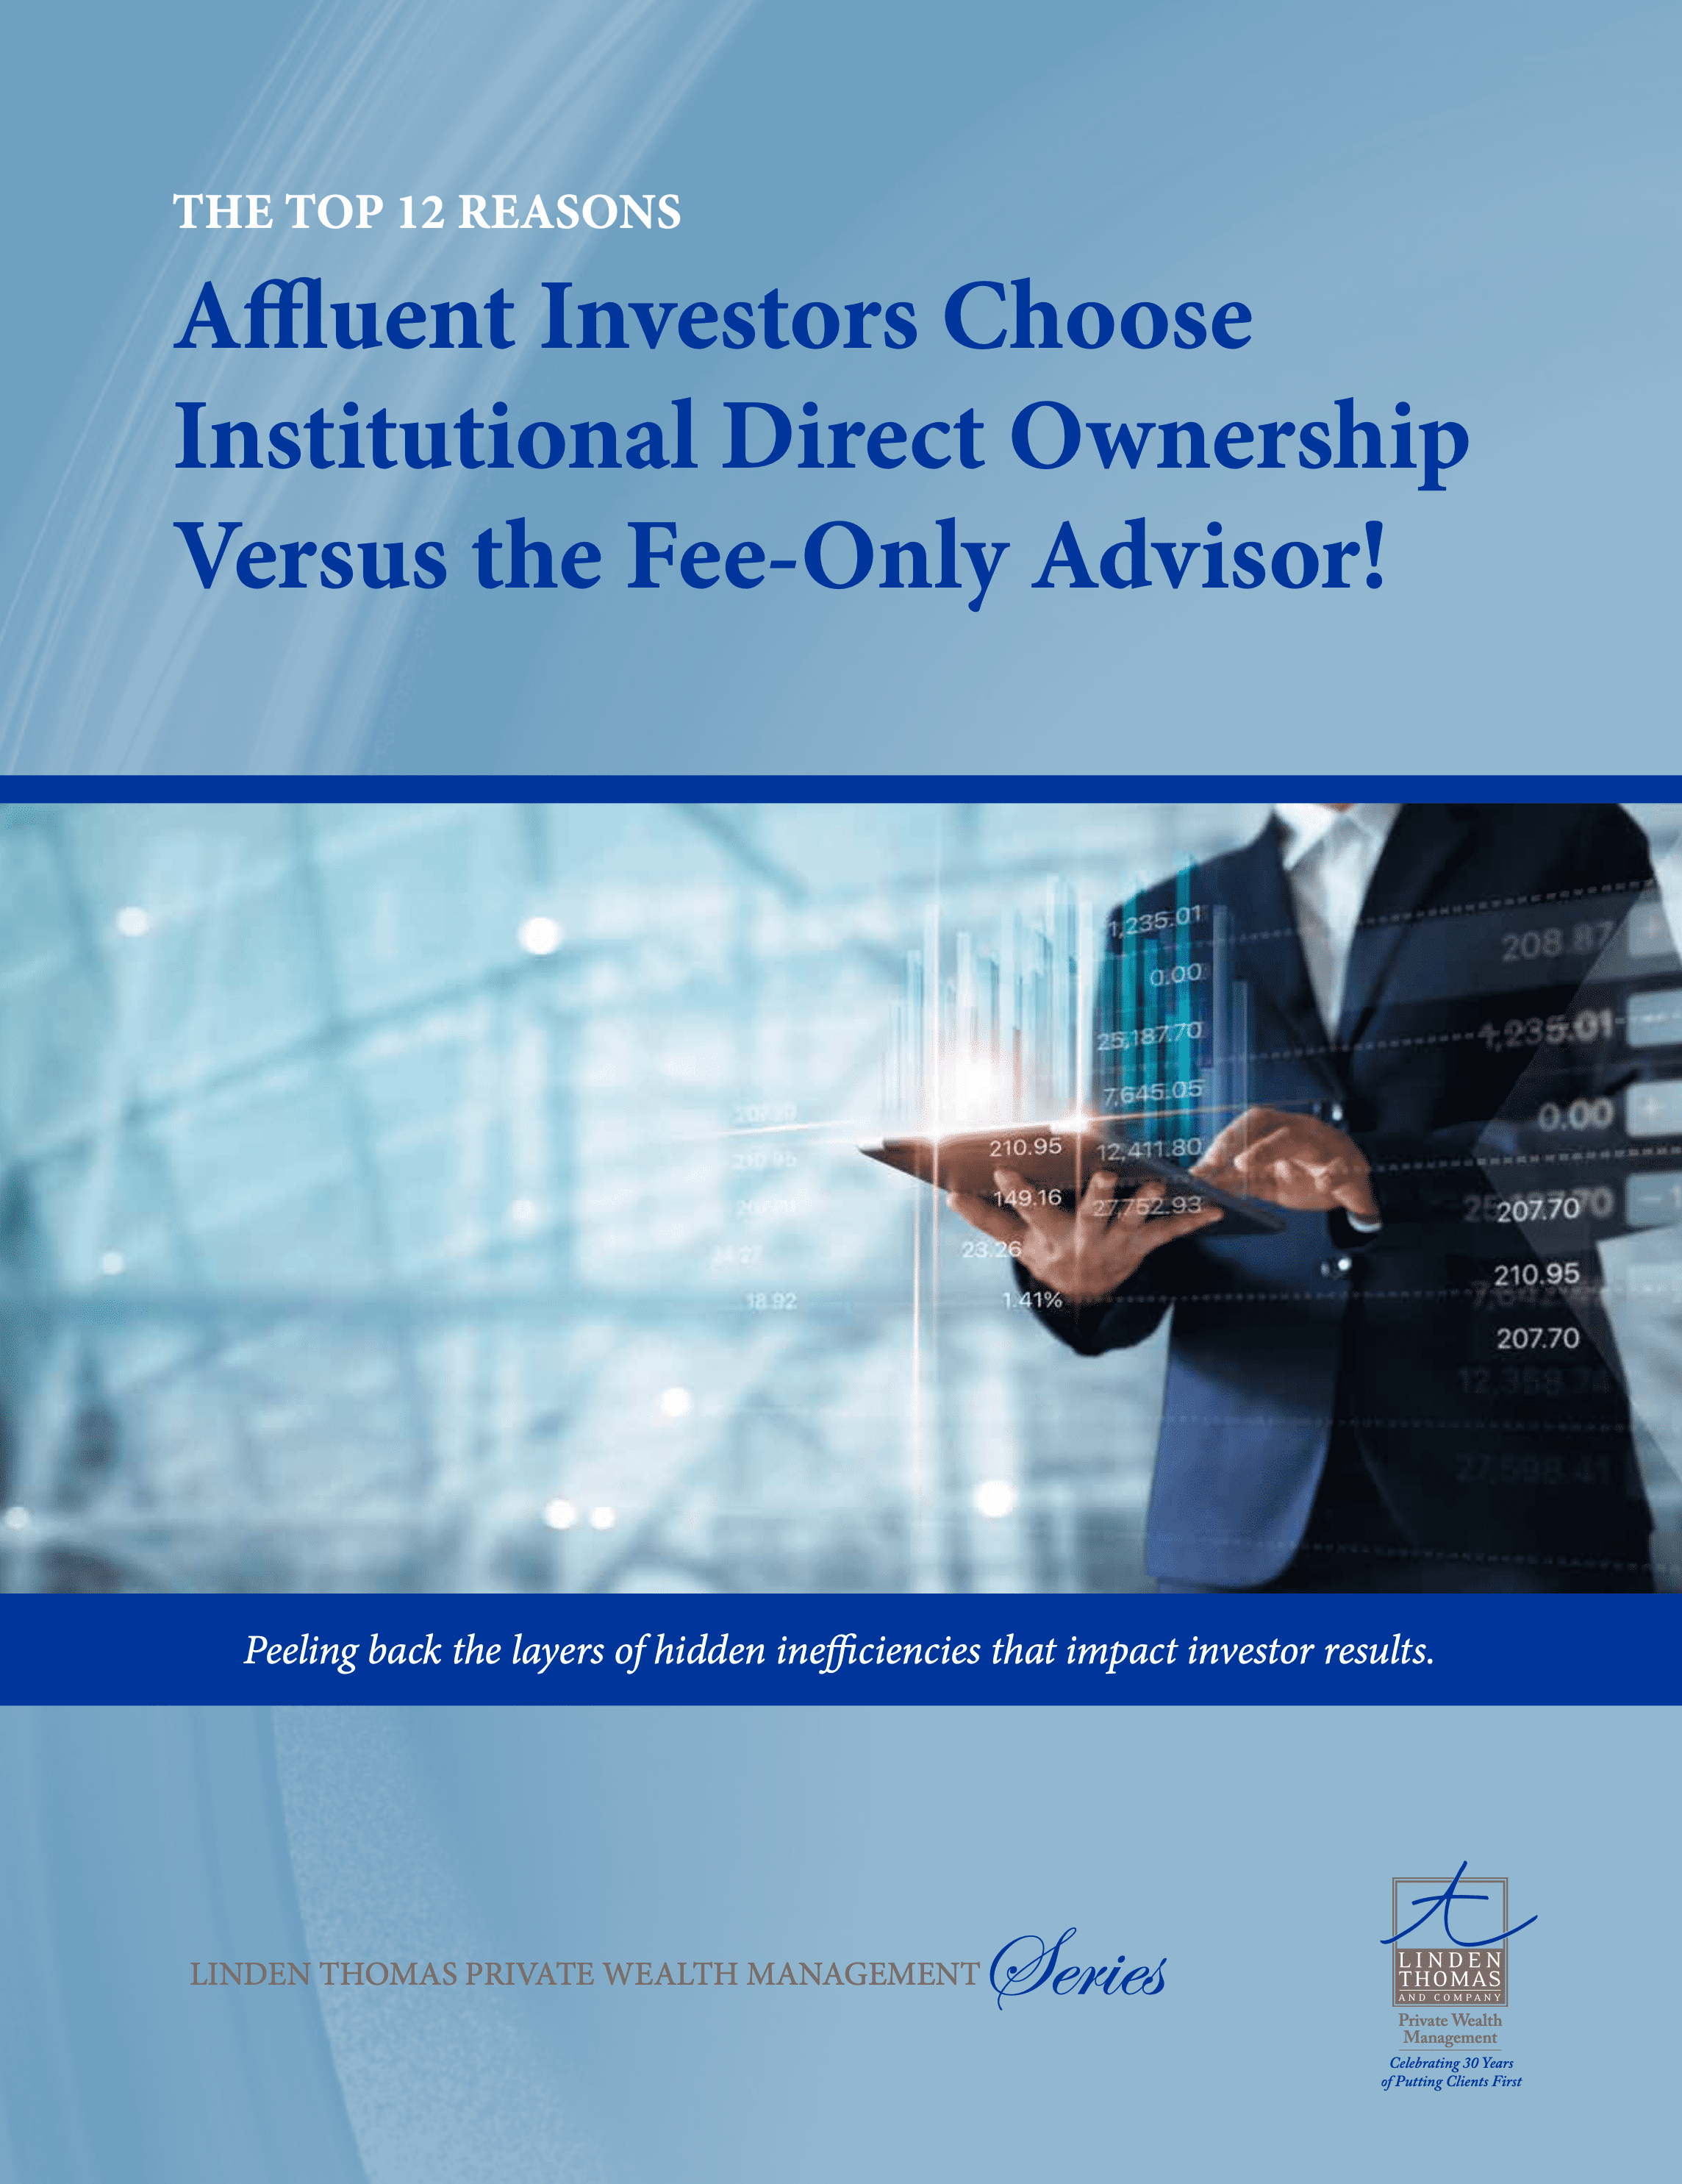 12 Reasons Affluent Investors Choose Institutional Direct Ownership Versus the Fee-Only Advisor